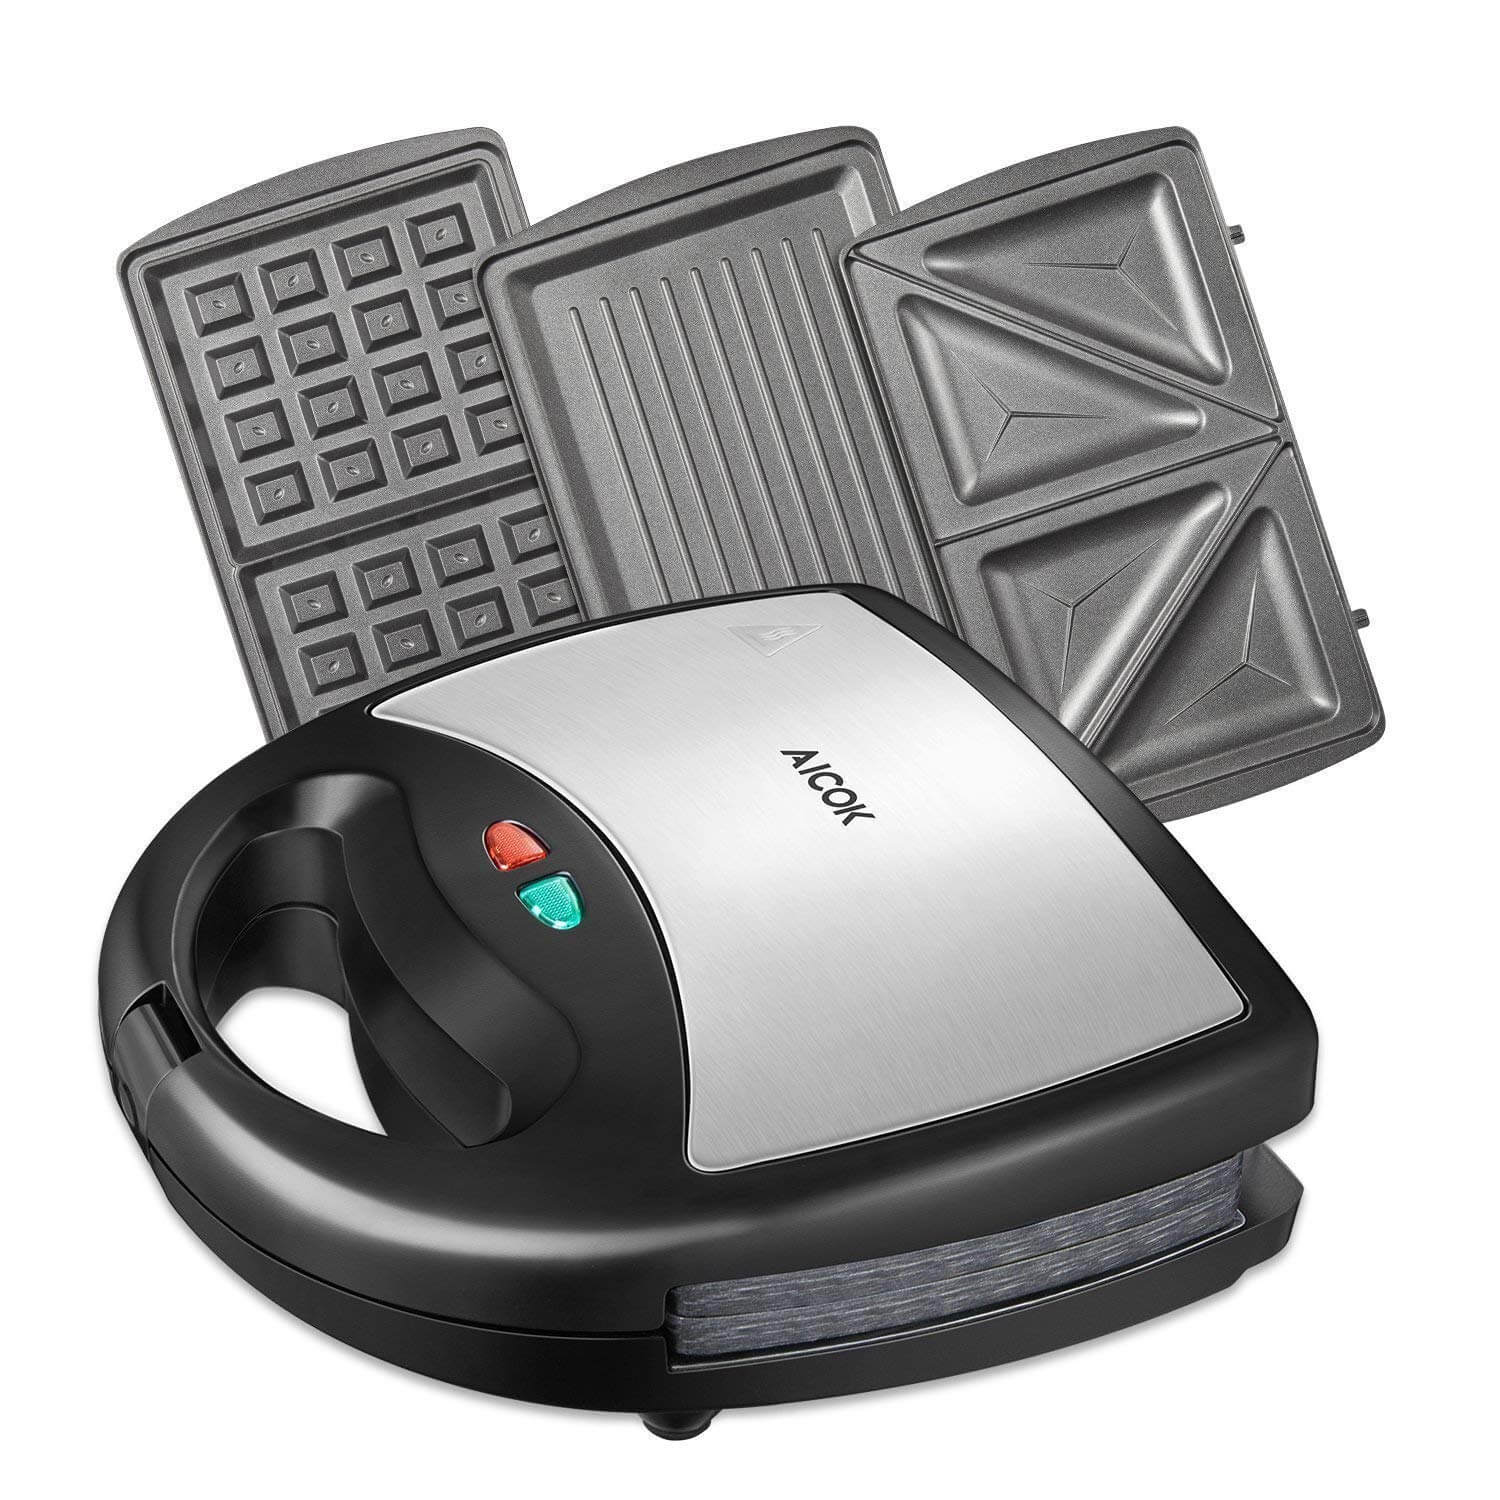 3 in 1 Electric Sandwich Panini Press and Waffle Maker Iron Changing Plates